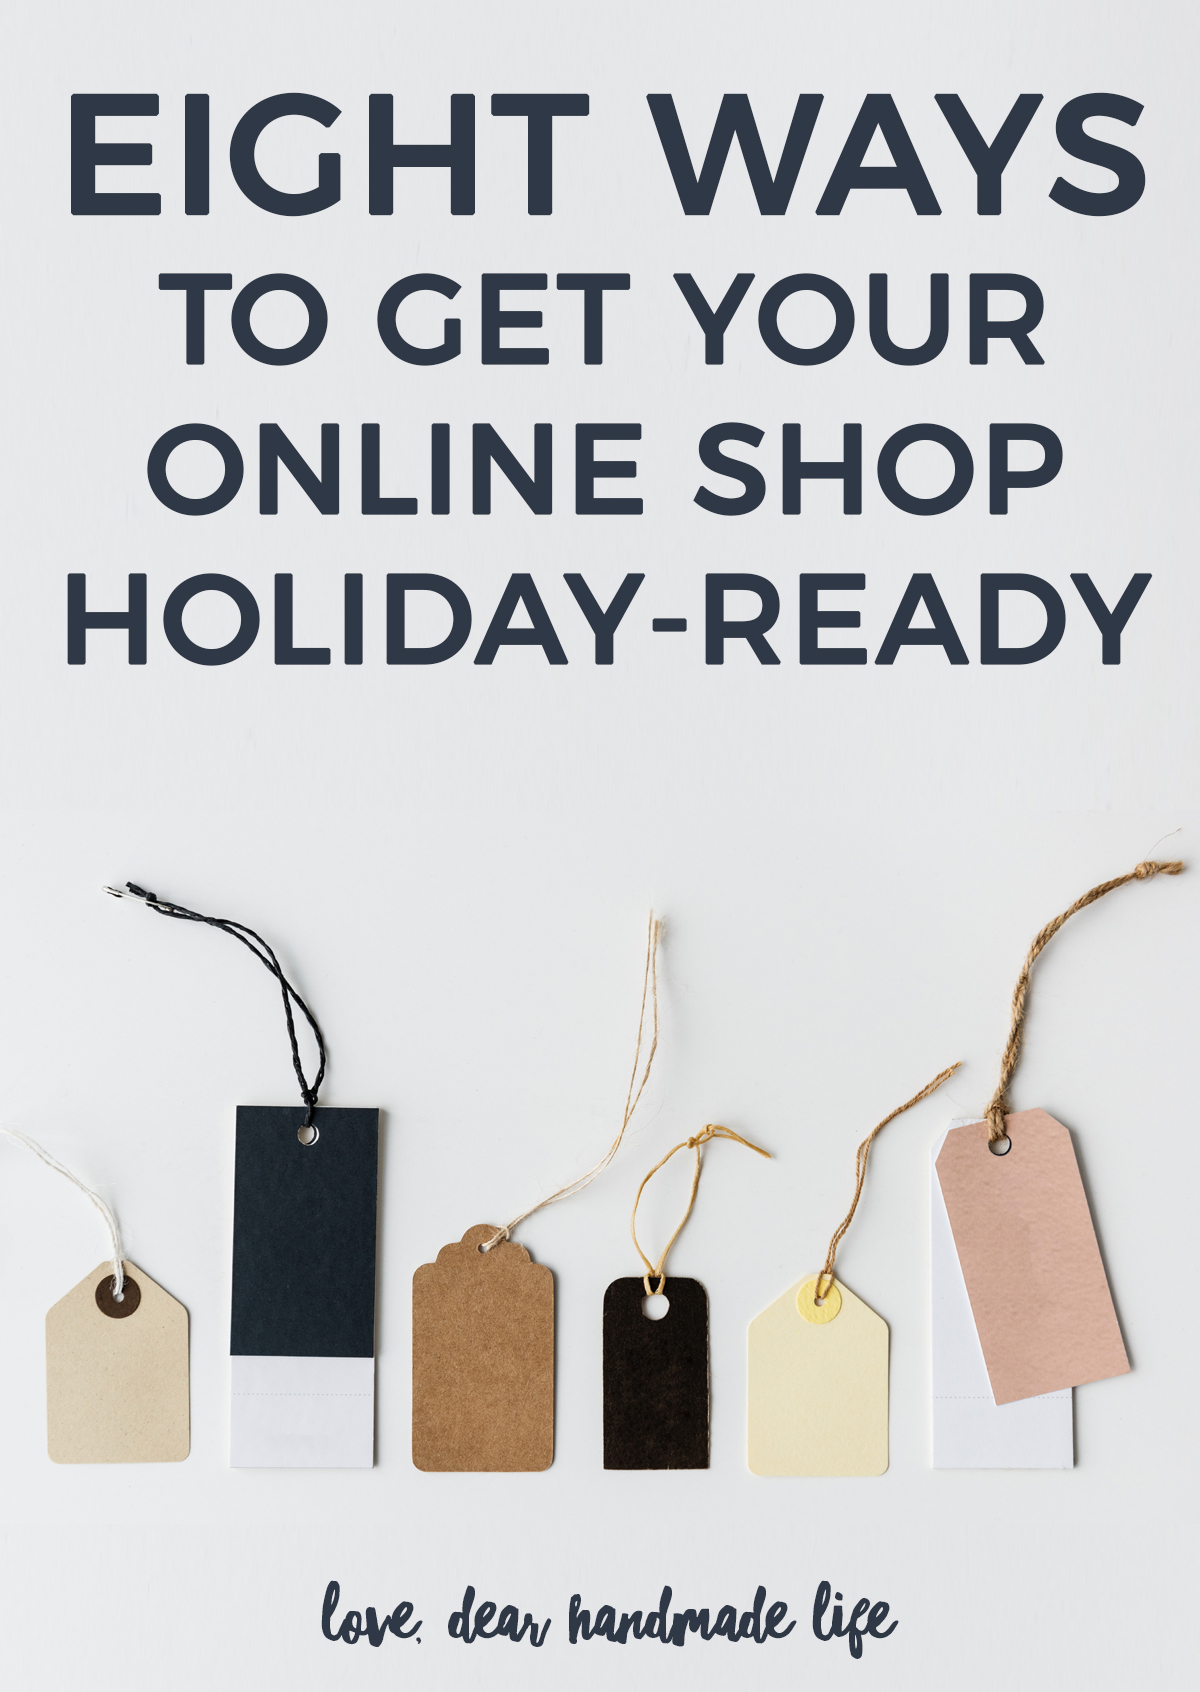 Eight ways to get your online shop holiday-ready from Dear Handmade Life